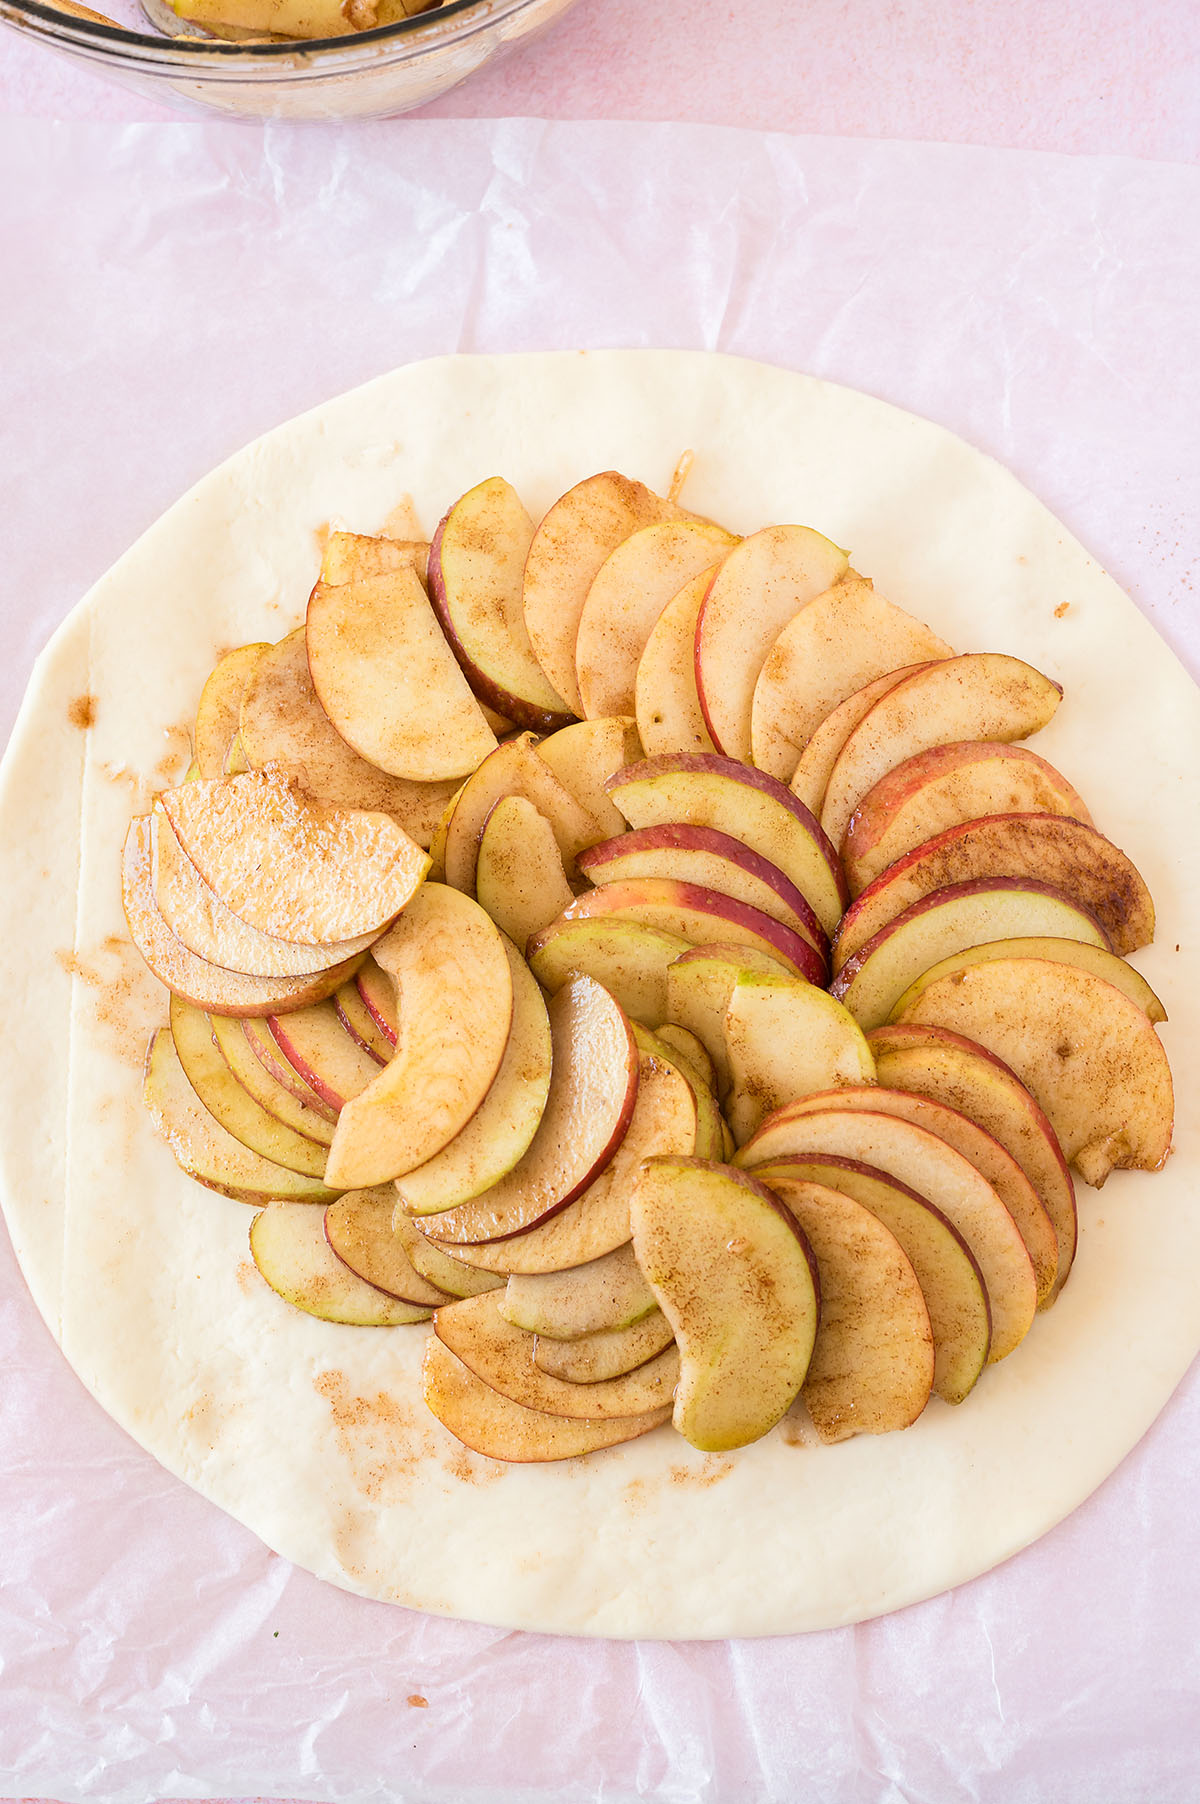 Sliced apples with brown sugar and cinnamon on top.